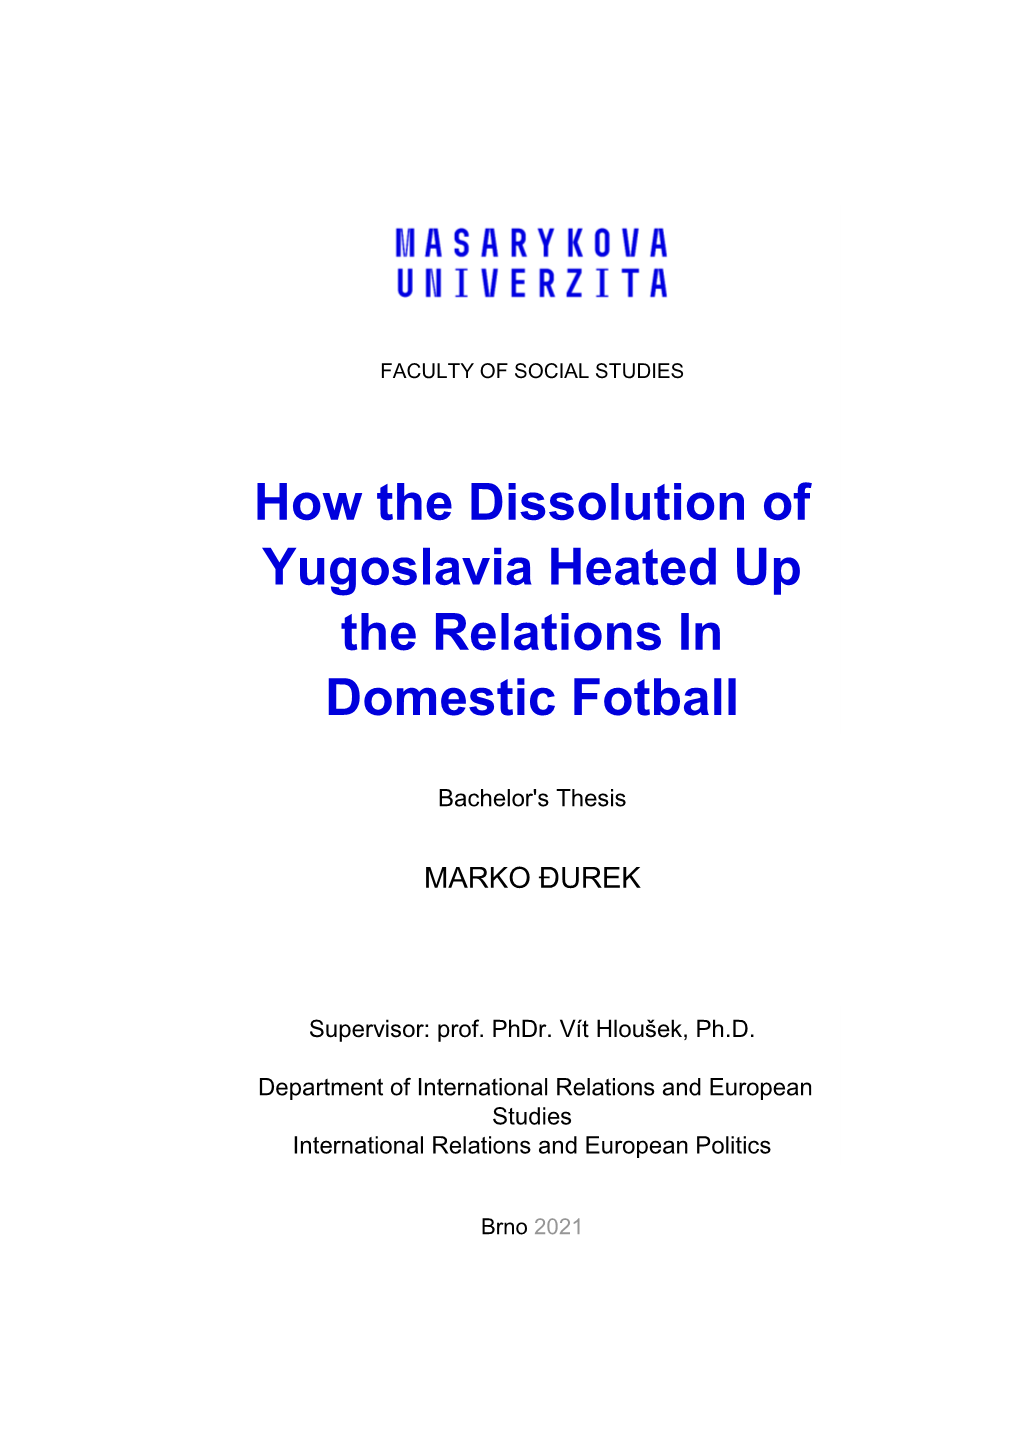 How the Dissolution of Yugoslavia Heated up the Relations in Domestic Fotball